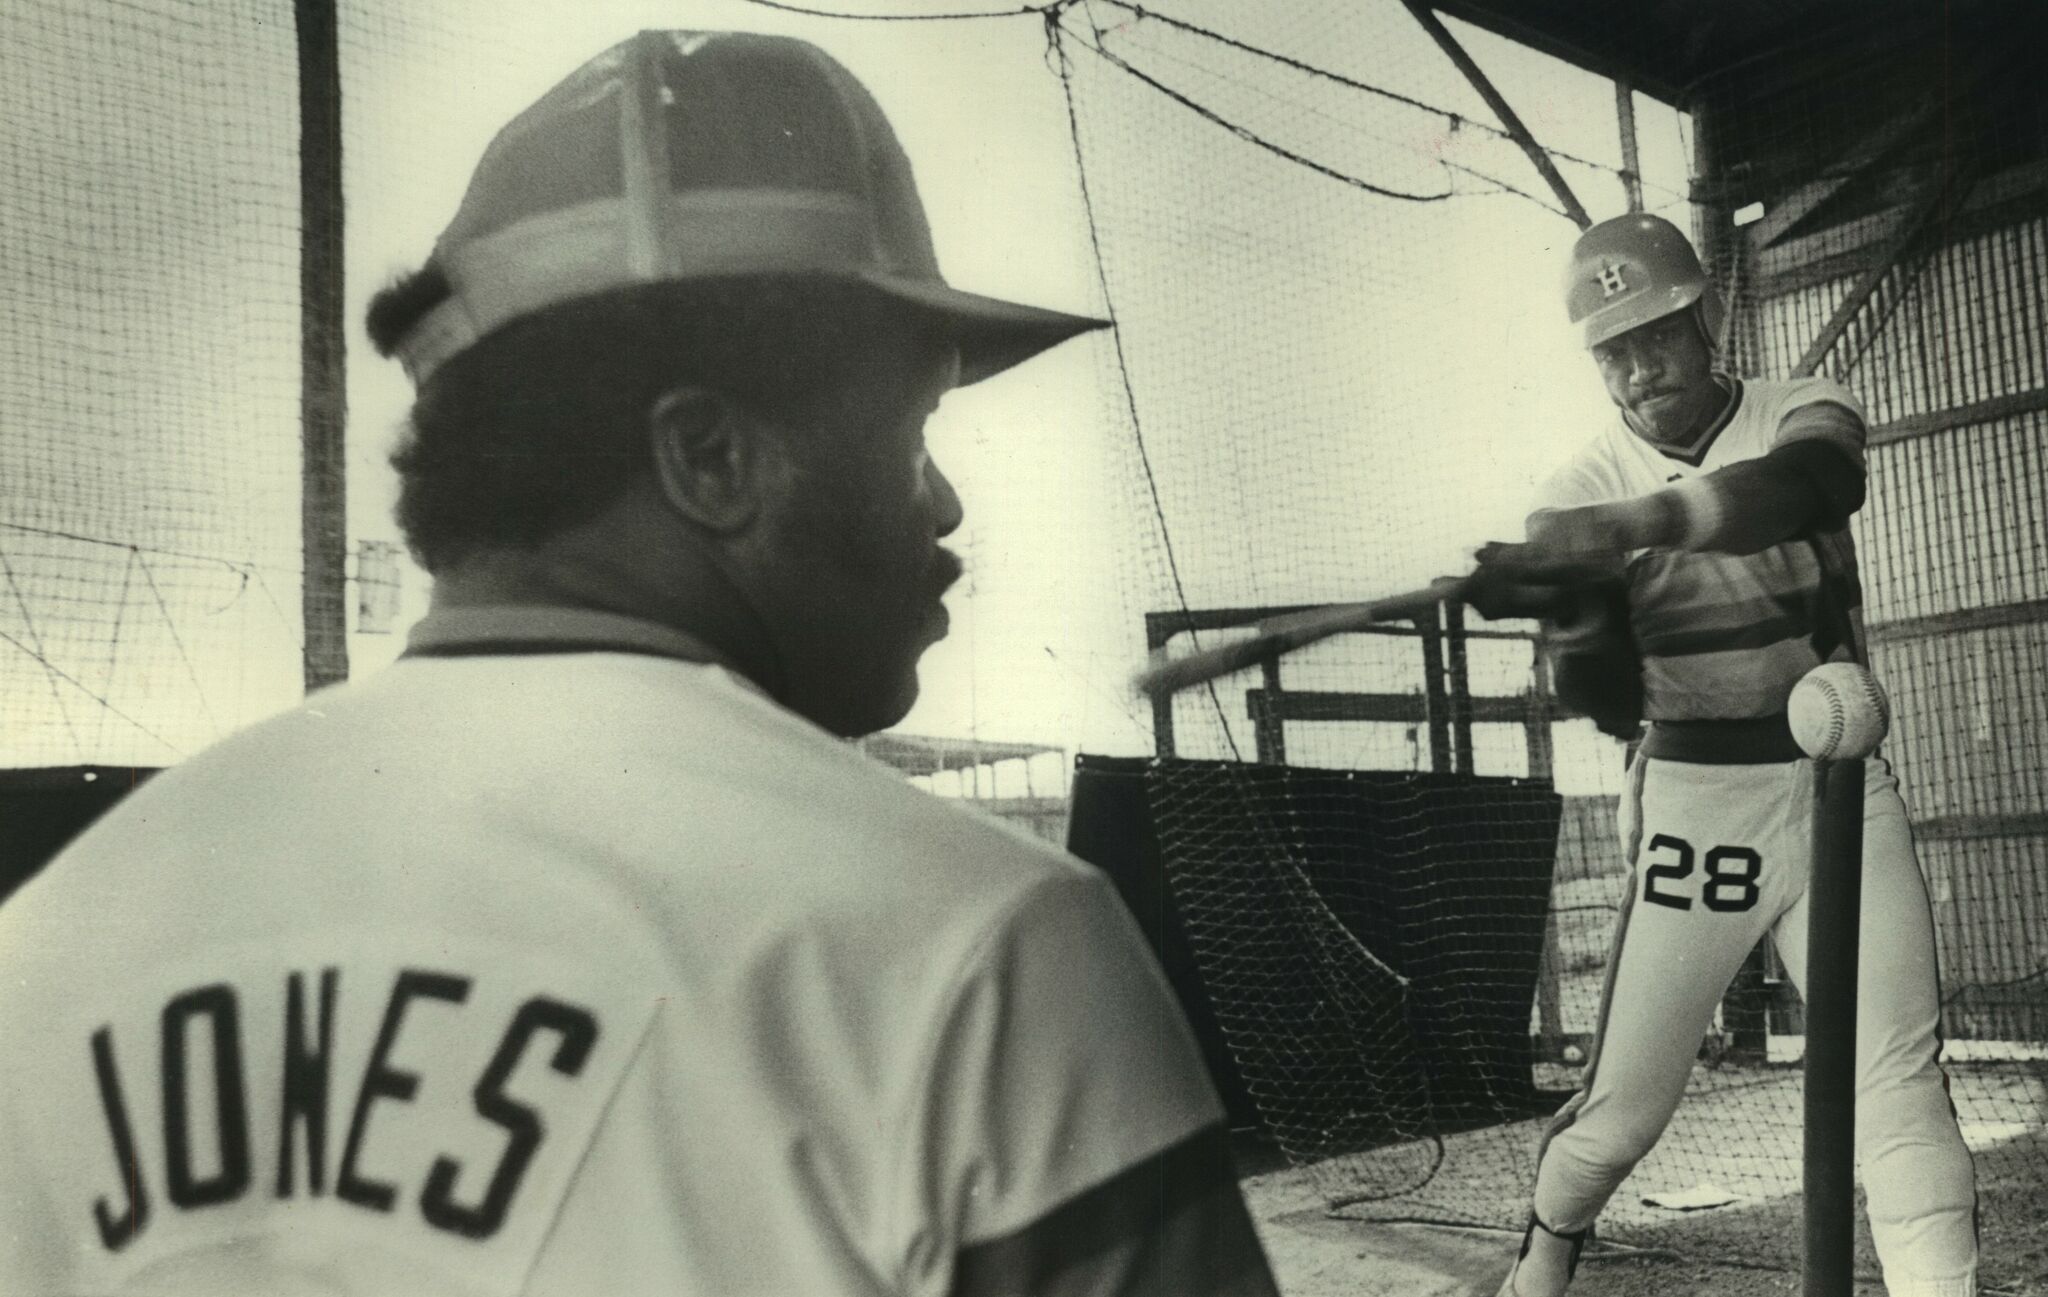 Deacon Jones lived life of baseball, from Astros to Jackie Robinson